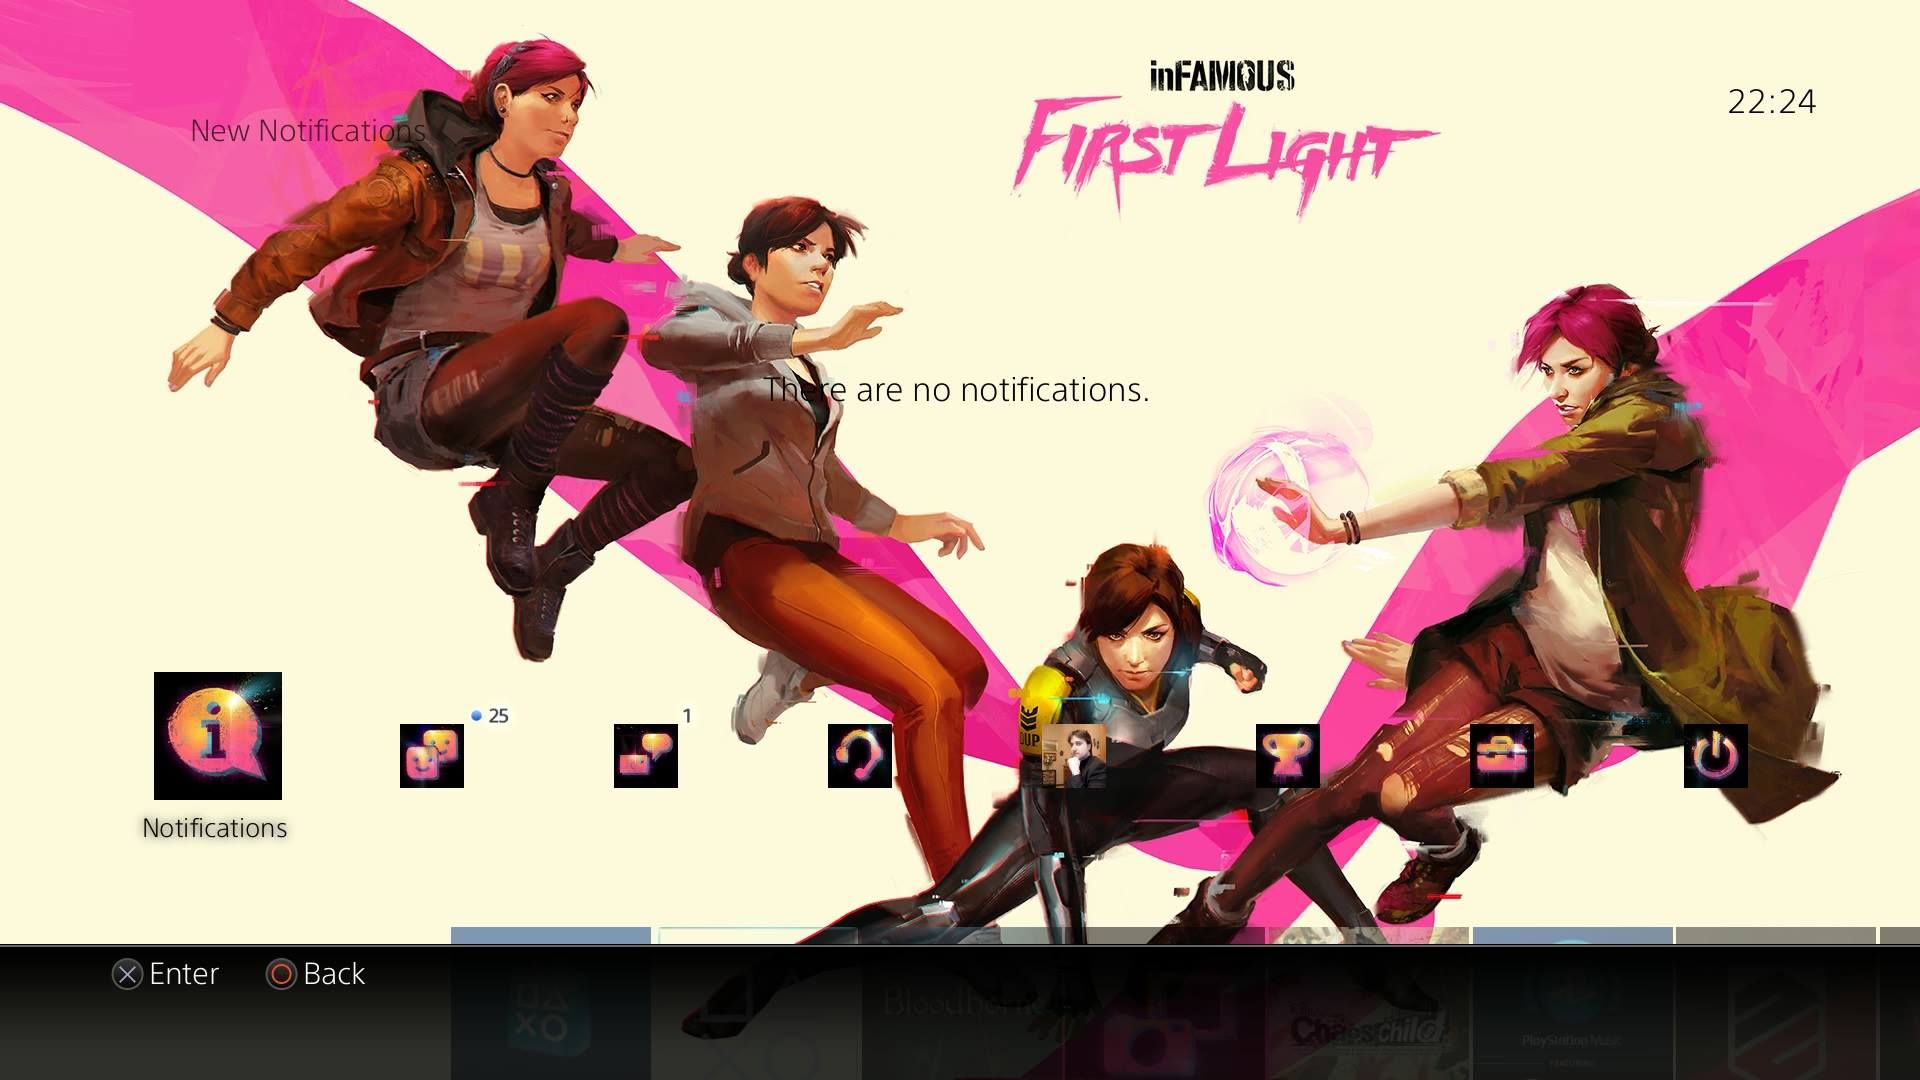 inFAMOUS: Second Son First Light PS4 Themes Finally Released by Sony on European PSN